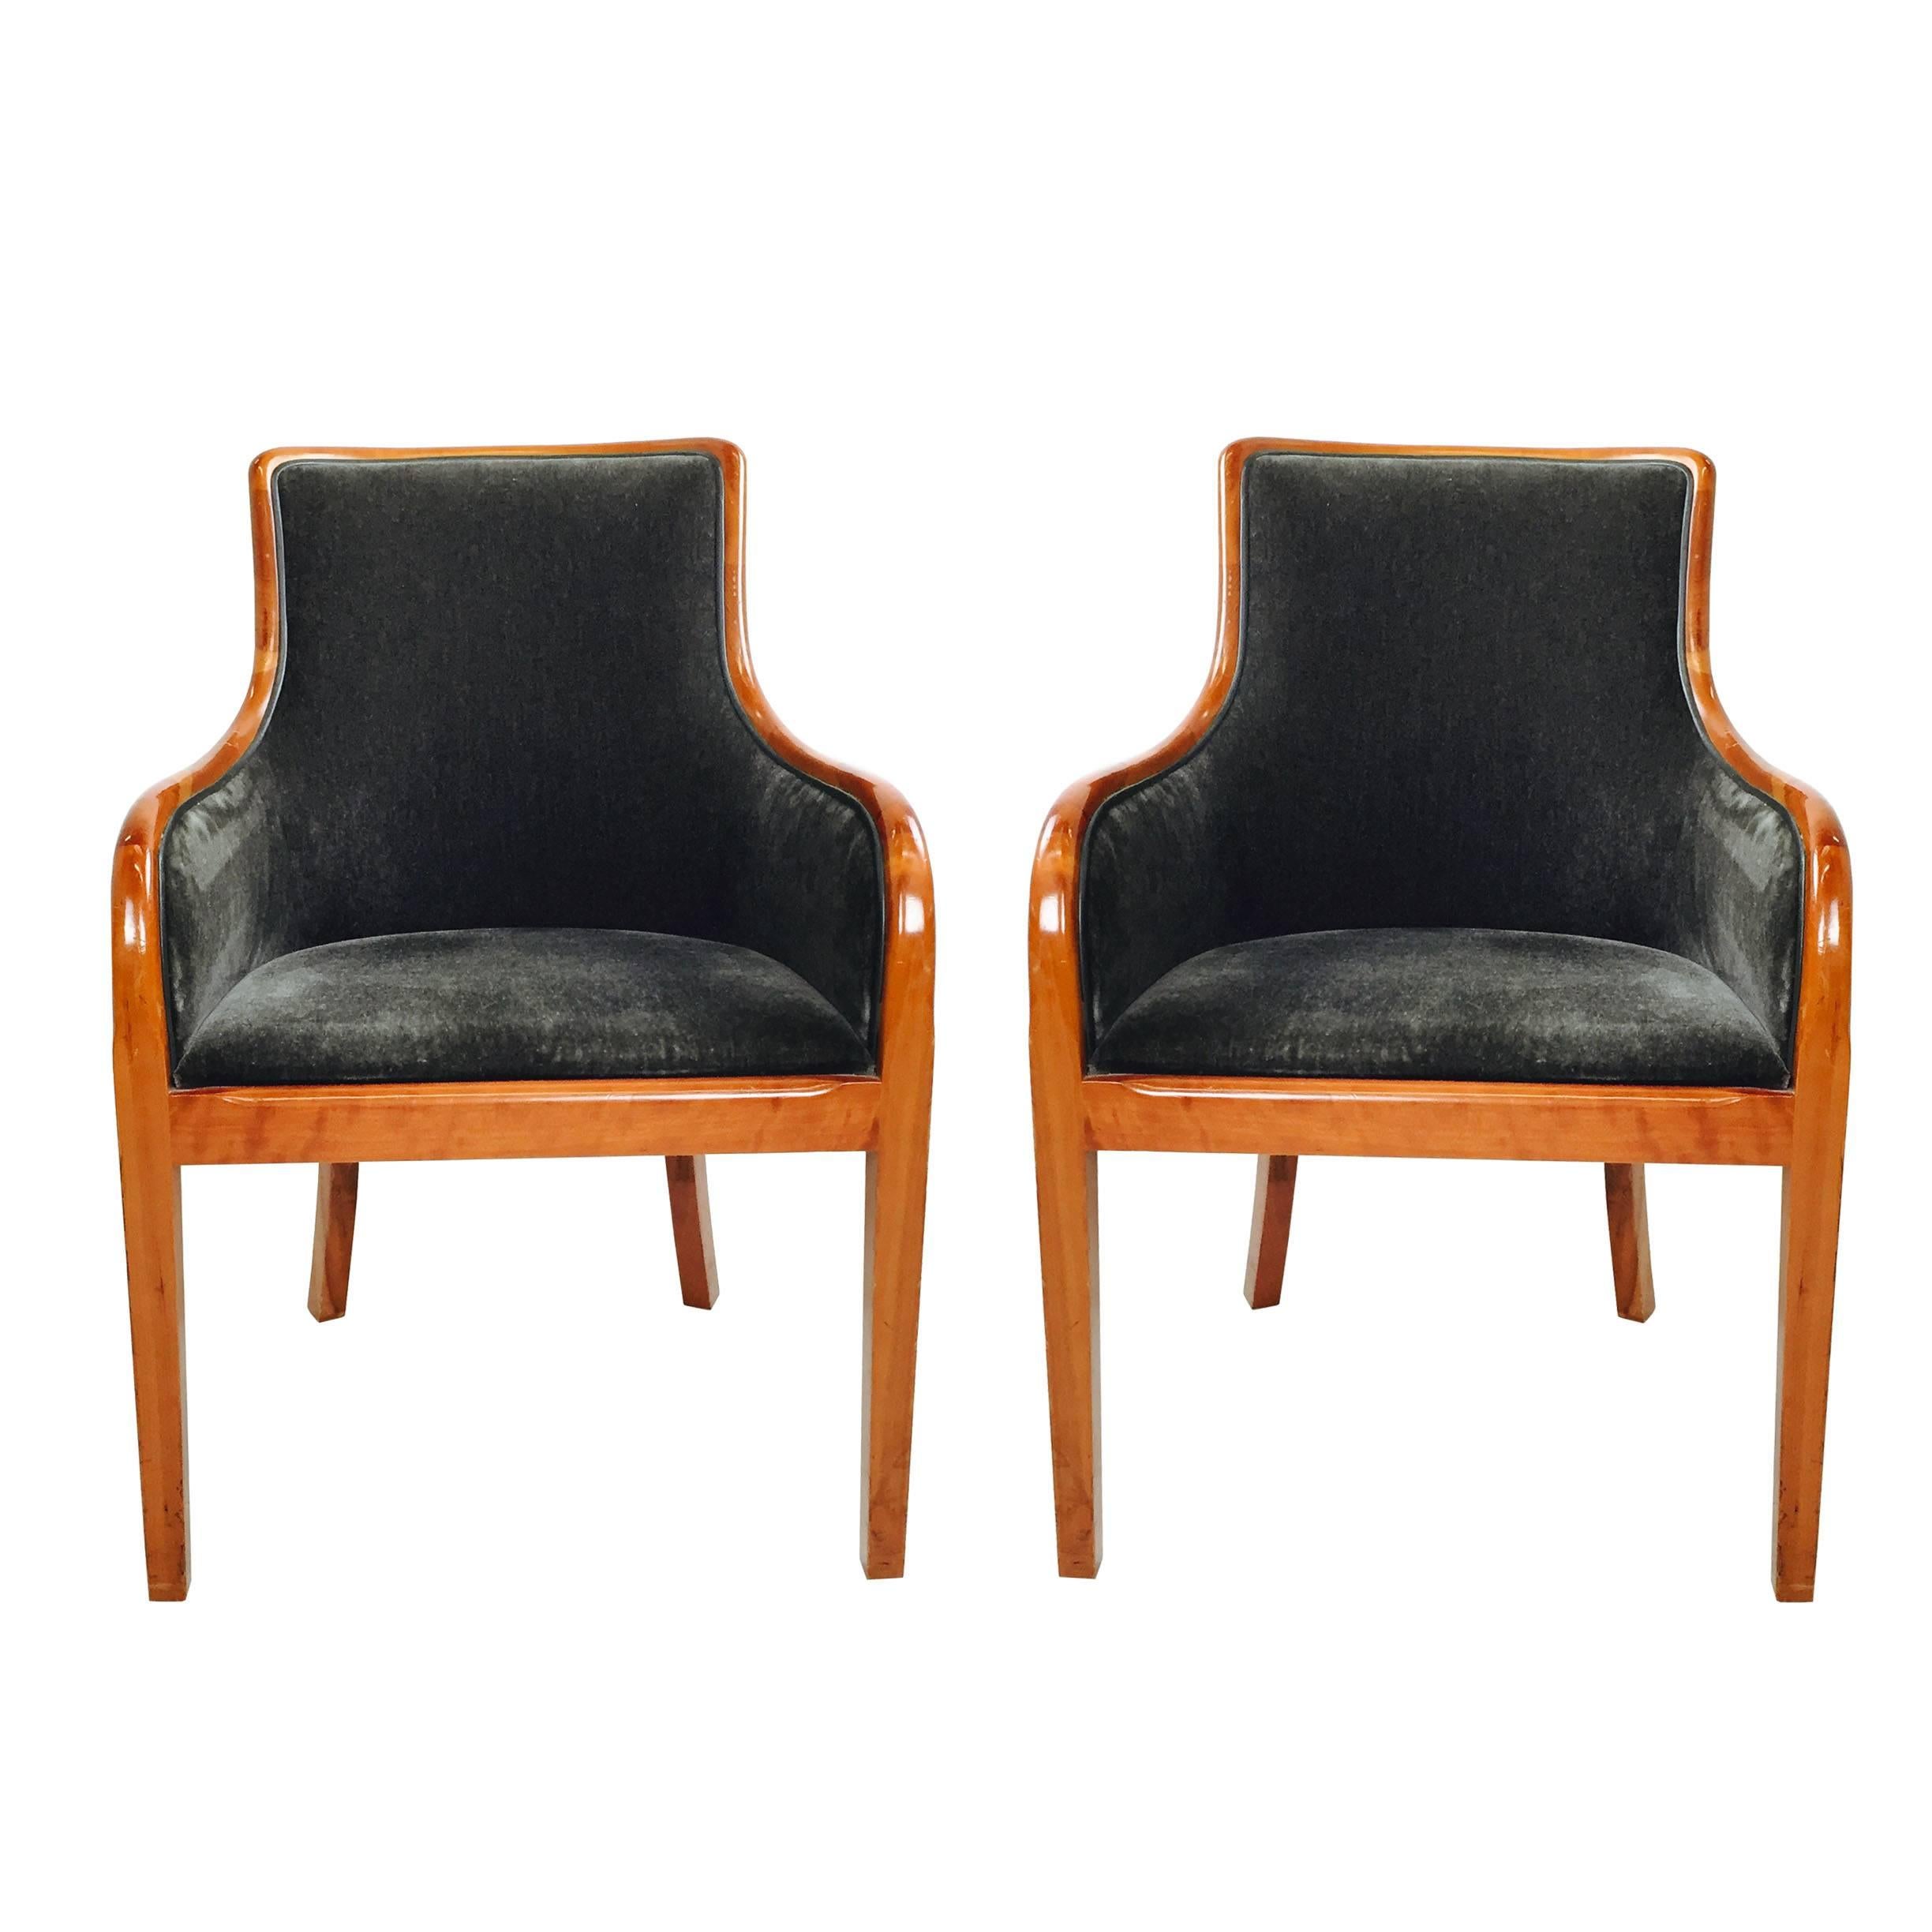 Pair of Mohair and cherrywood chairs by Zographas. In good vintage condition. Refinishing is recommended. Three sets of pairs are available.

Dimensions: 23" W x 26" D x 35" T.